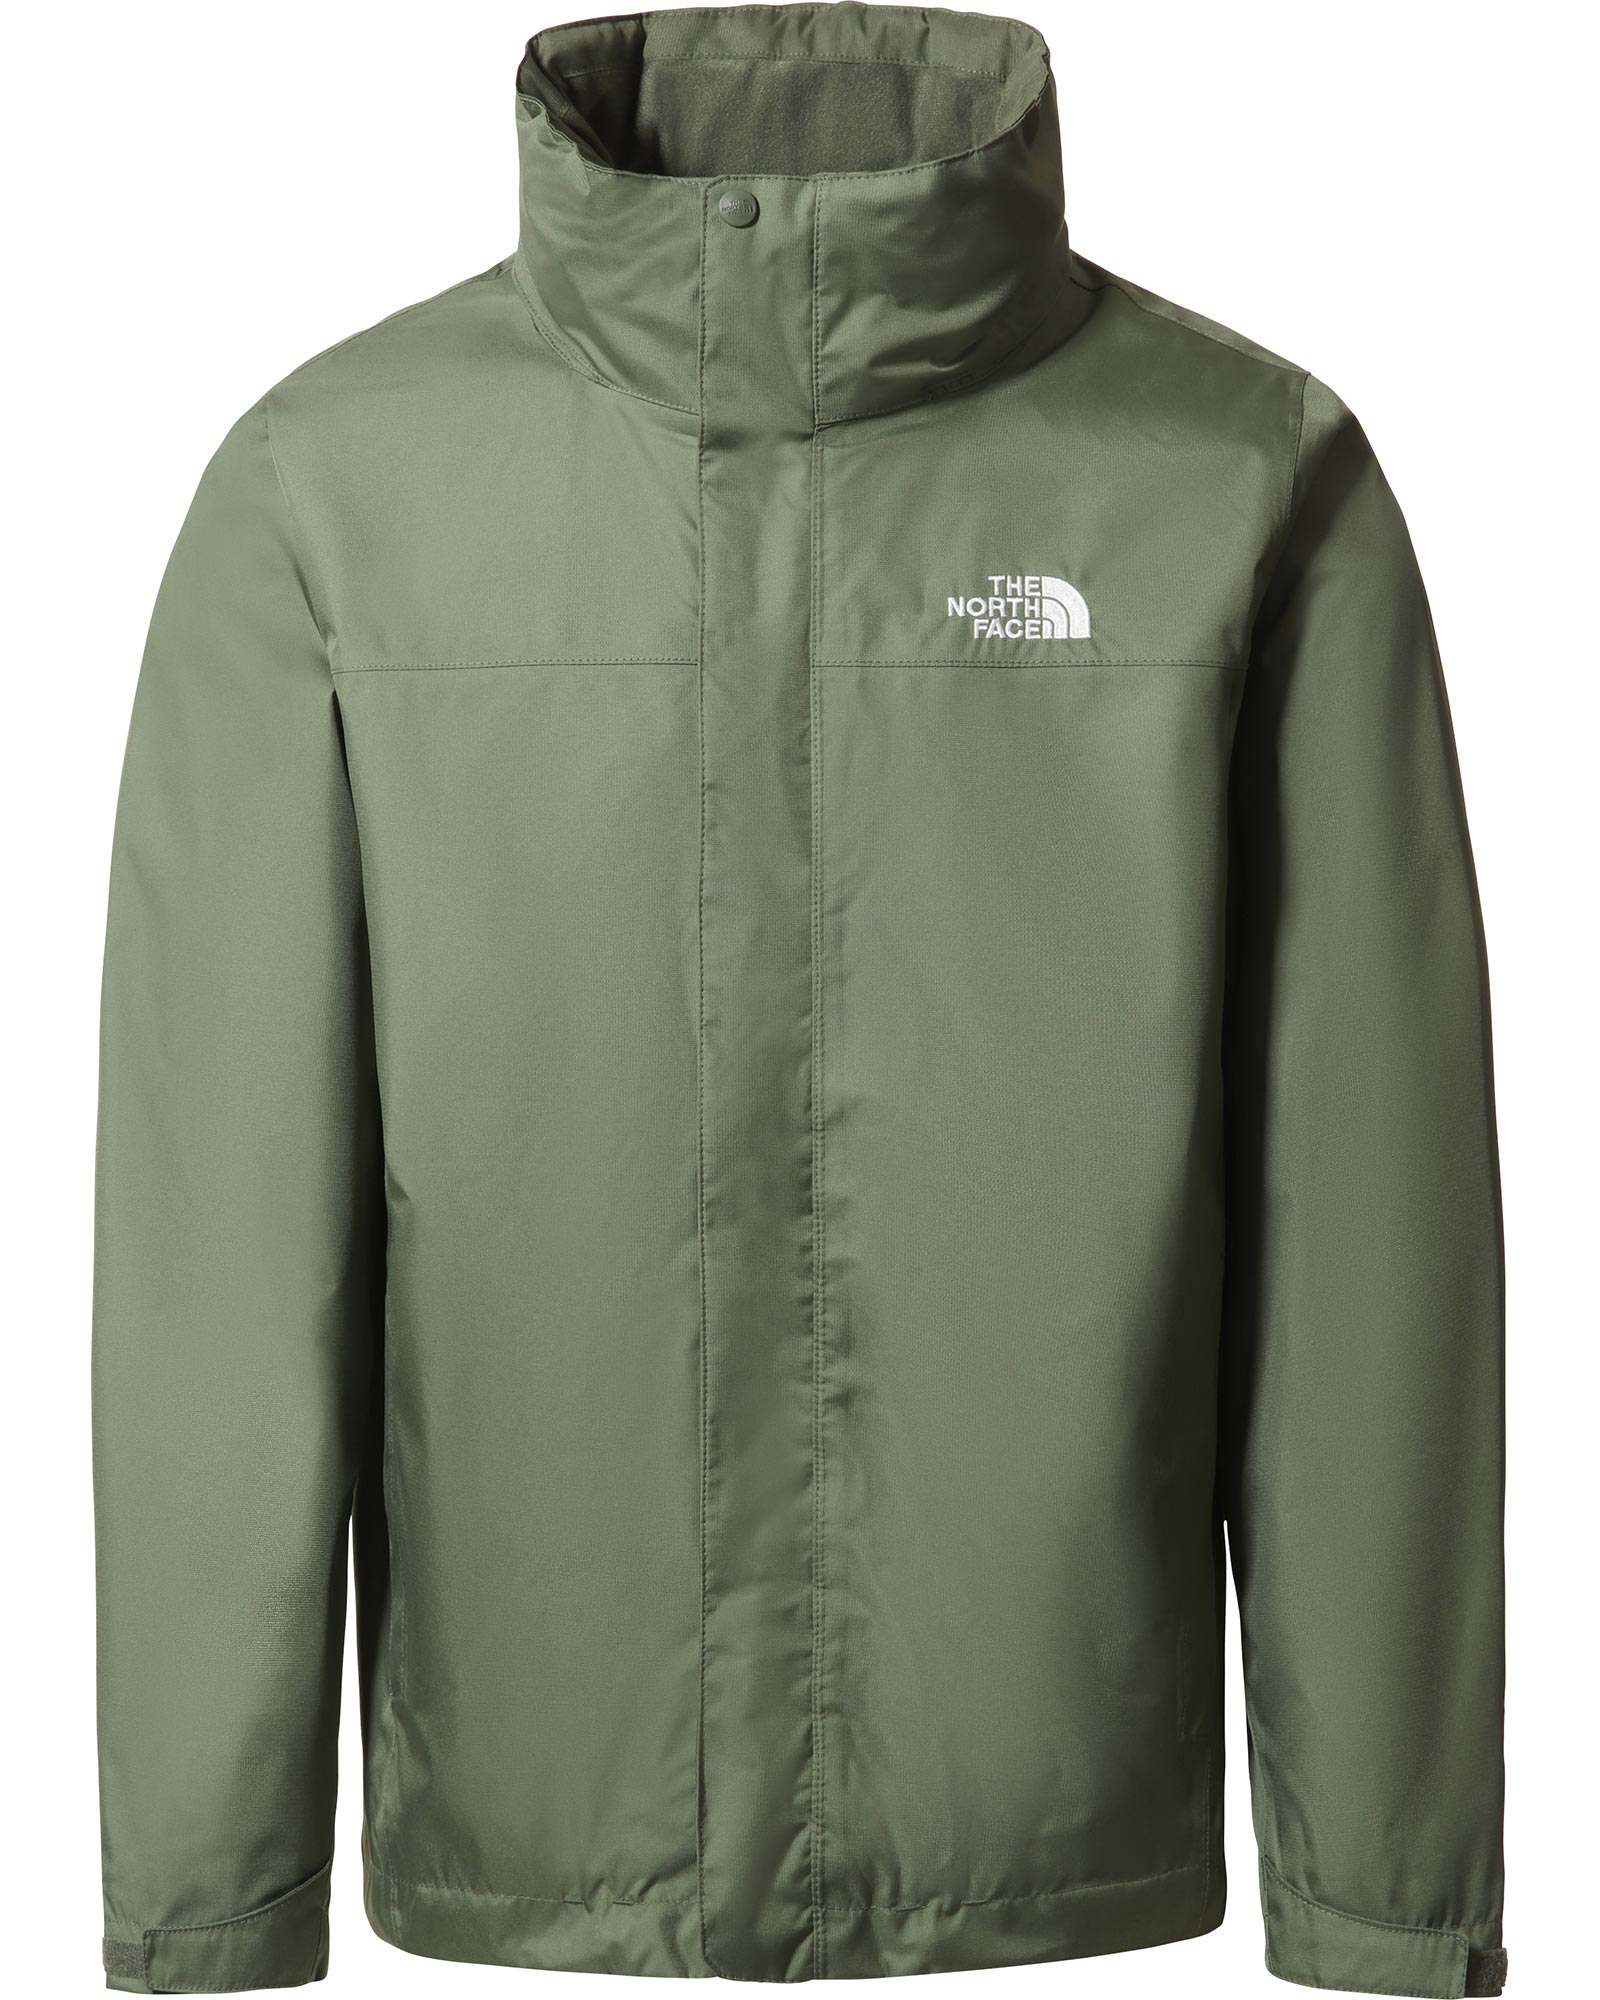 The North Face Evolve Triclimate Men’s Jacket - Thyme Green M